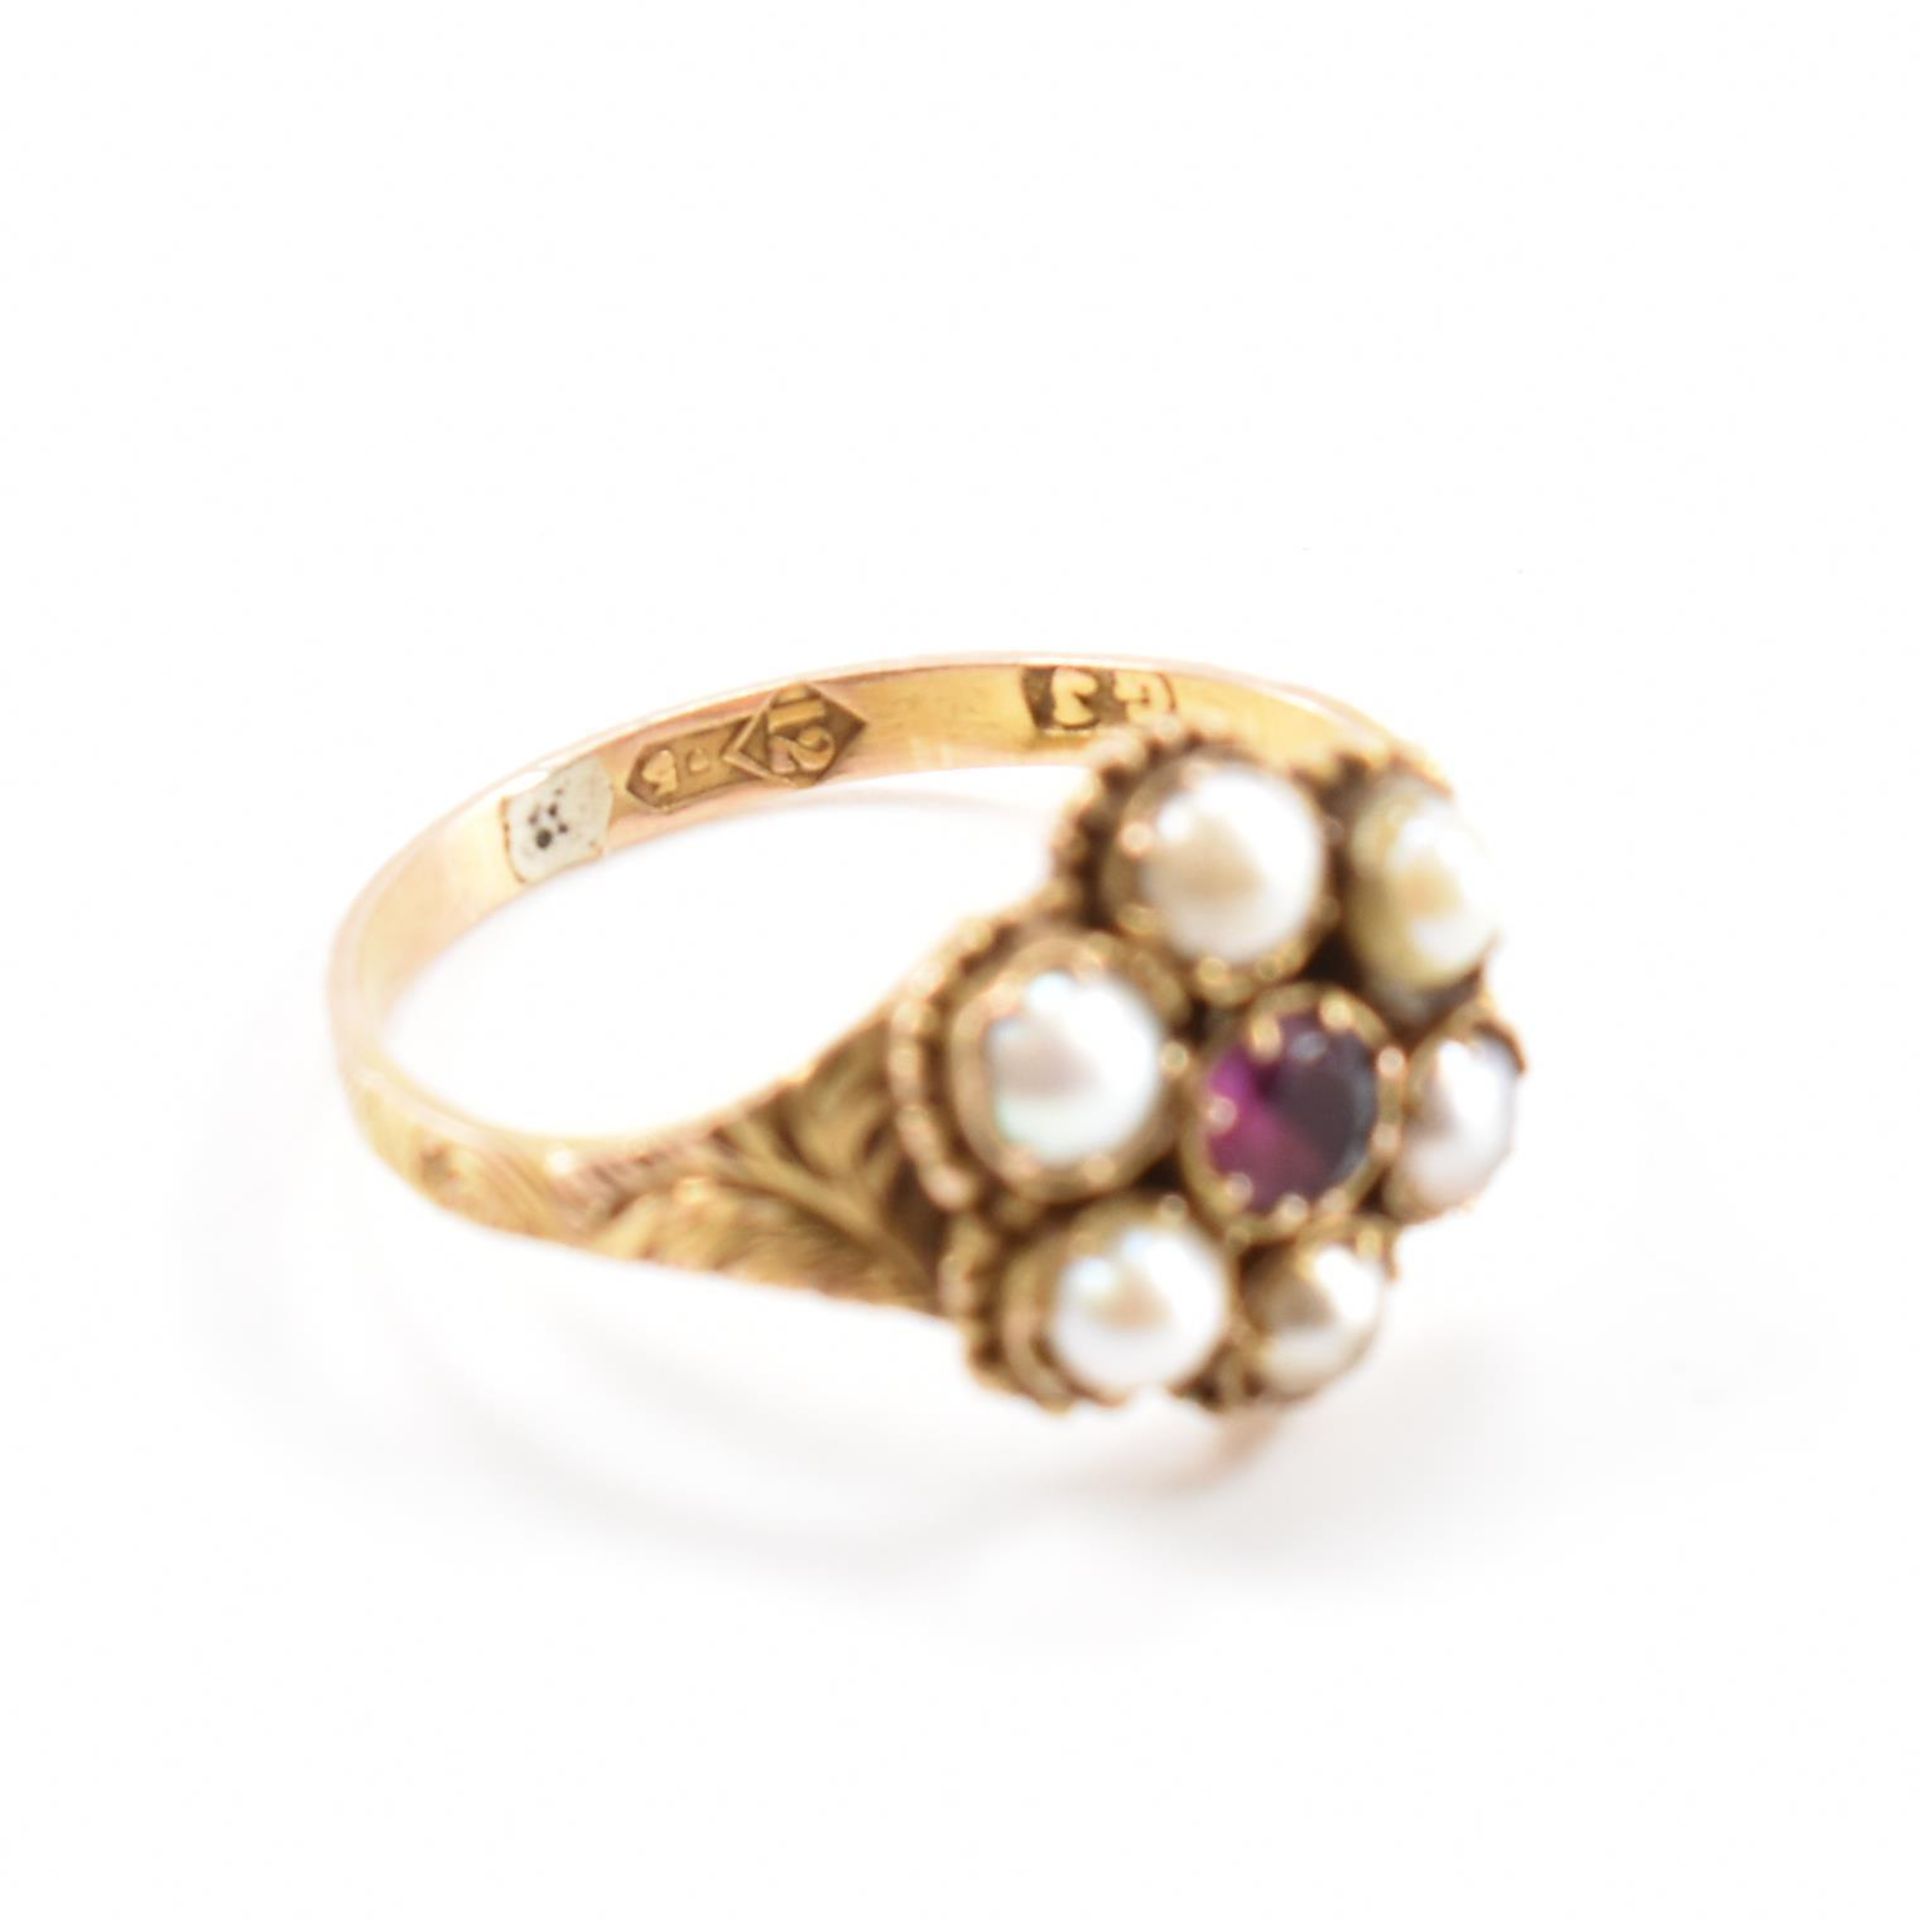 TWO 19TH CENTURY GOLD & GEM SET RINGS - Image 5 of 8